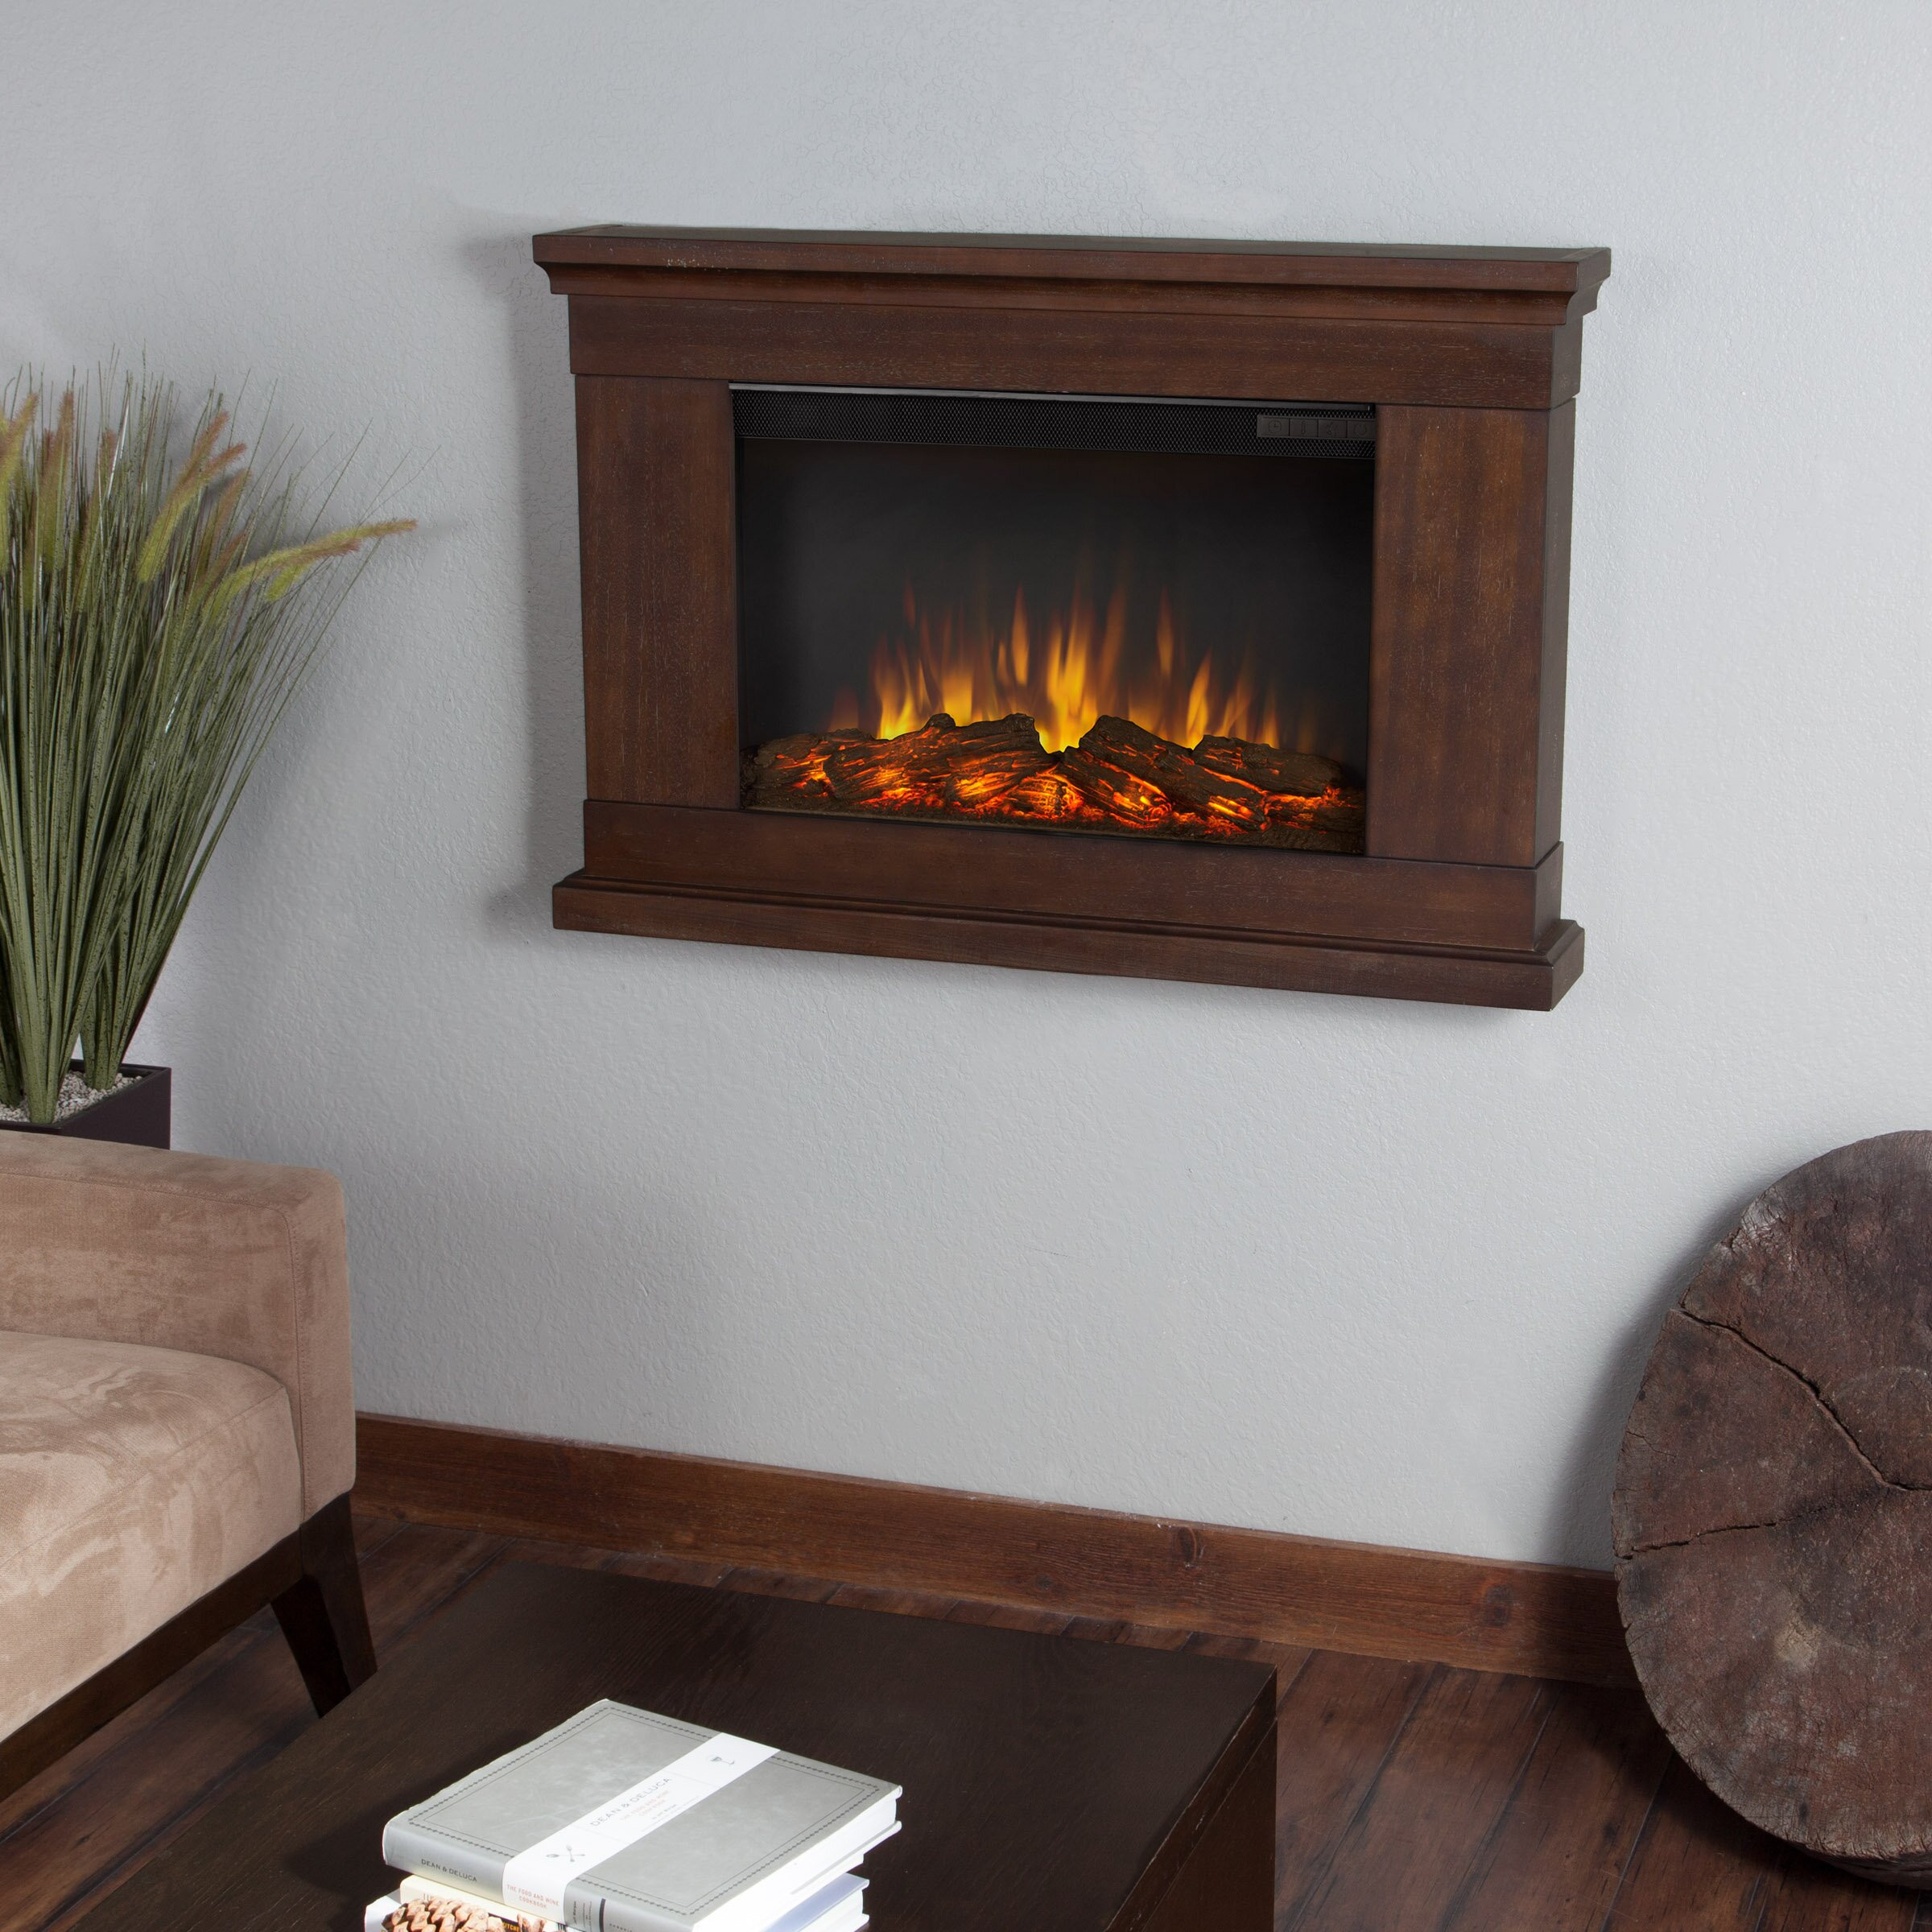 Wall Hung Electric Fireplace
 Real Flame Slim Wall Mount Electric Fireplace & Reviews